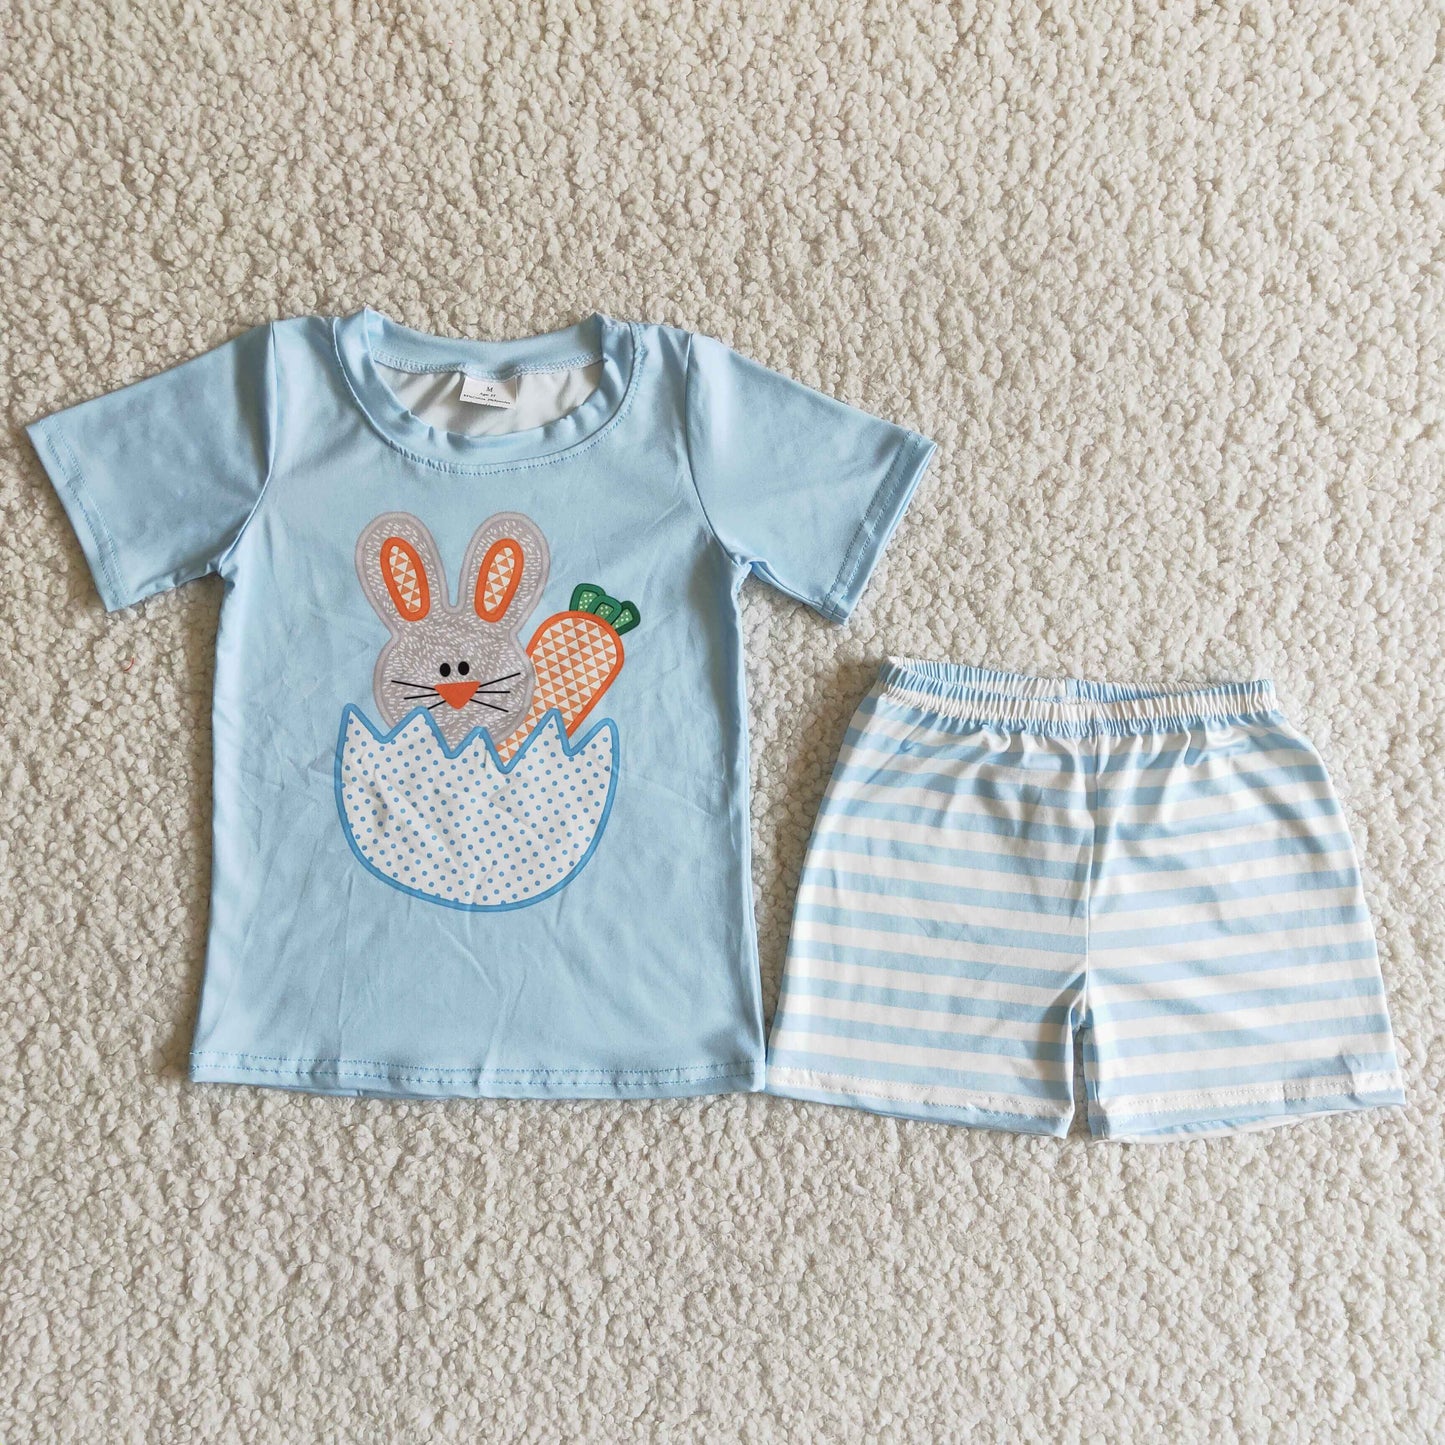 Bunny carrot shirt stripe shorts boy easter outfits